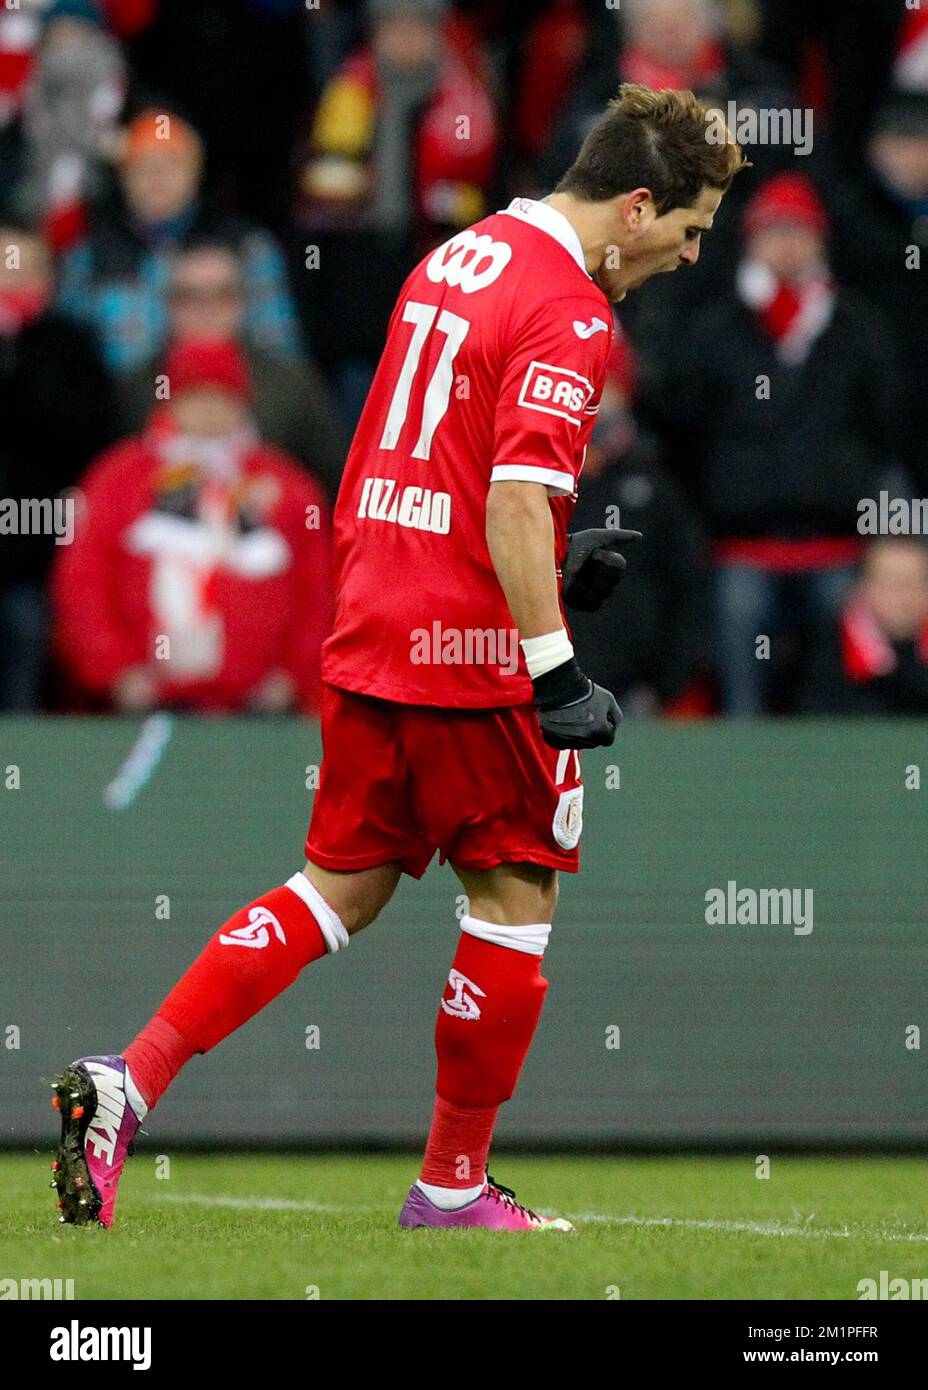 20130125 - LIEGE, BELGIUM: Standard's Maor Bar Buzaglo looks dejected during the Jupiler Pro League match between Standard de Liege and KV Kortrijk, in Liege, Friday 25 January 2013, on day 24 of the Belgian soccer championship. BELGA PHOTO VIRGINIE LEFOUR Stock Photo